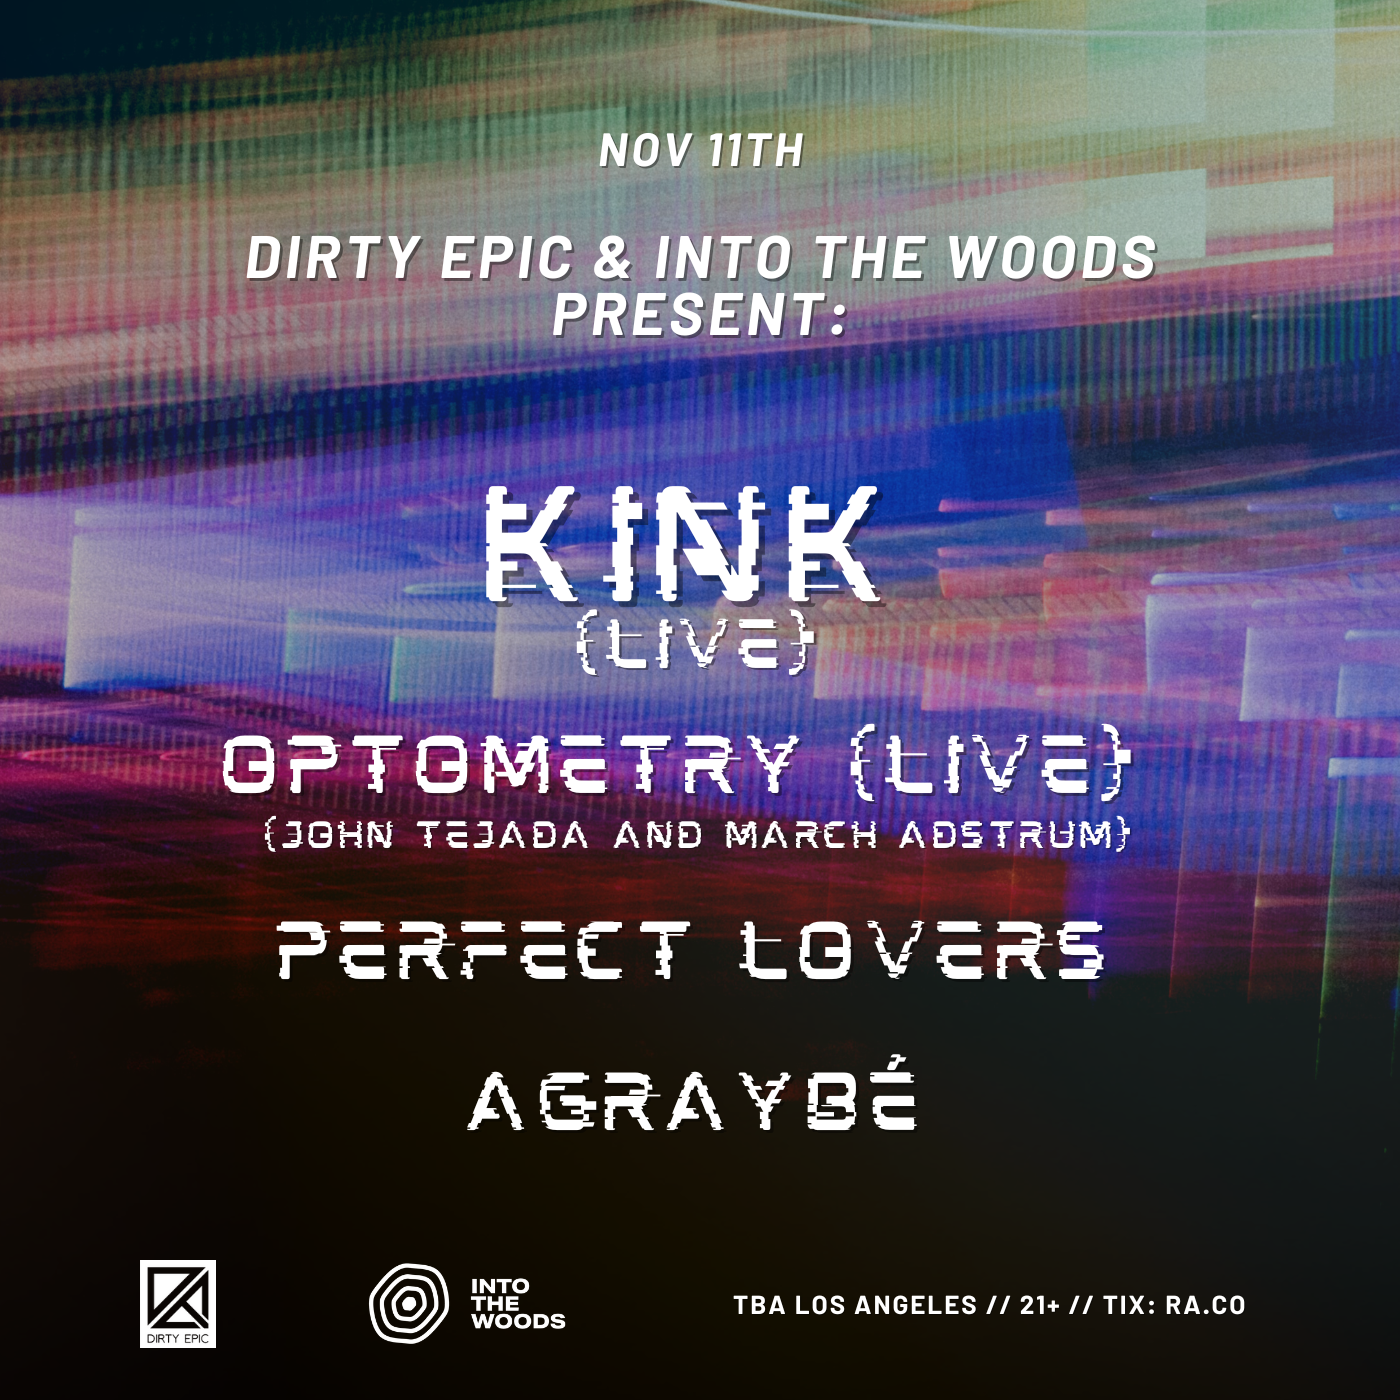 Dirty Epic and Into the Woods present: KiNK, Optometry Live, Perfect Lovers and agraybé - フライヤー表